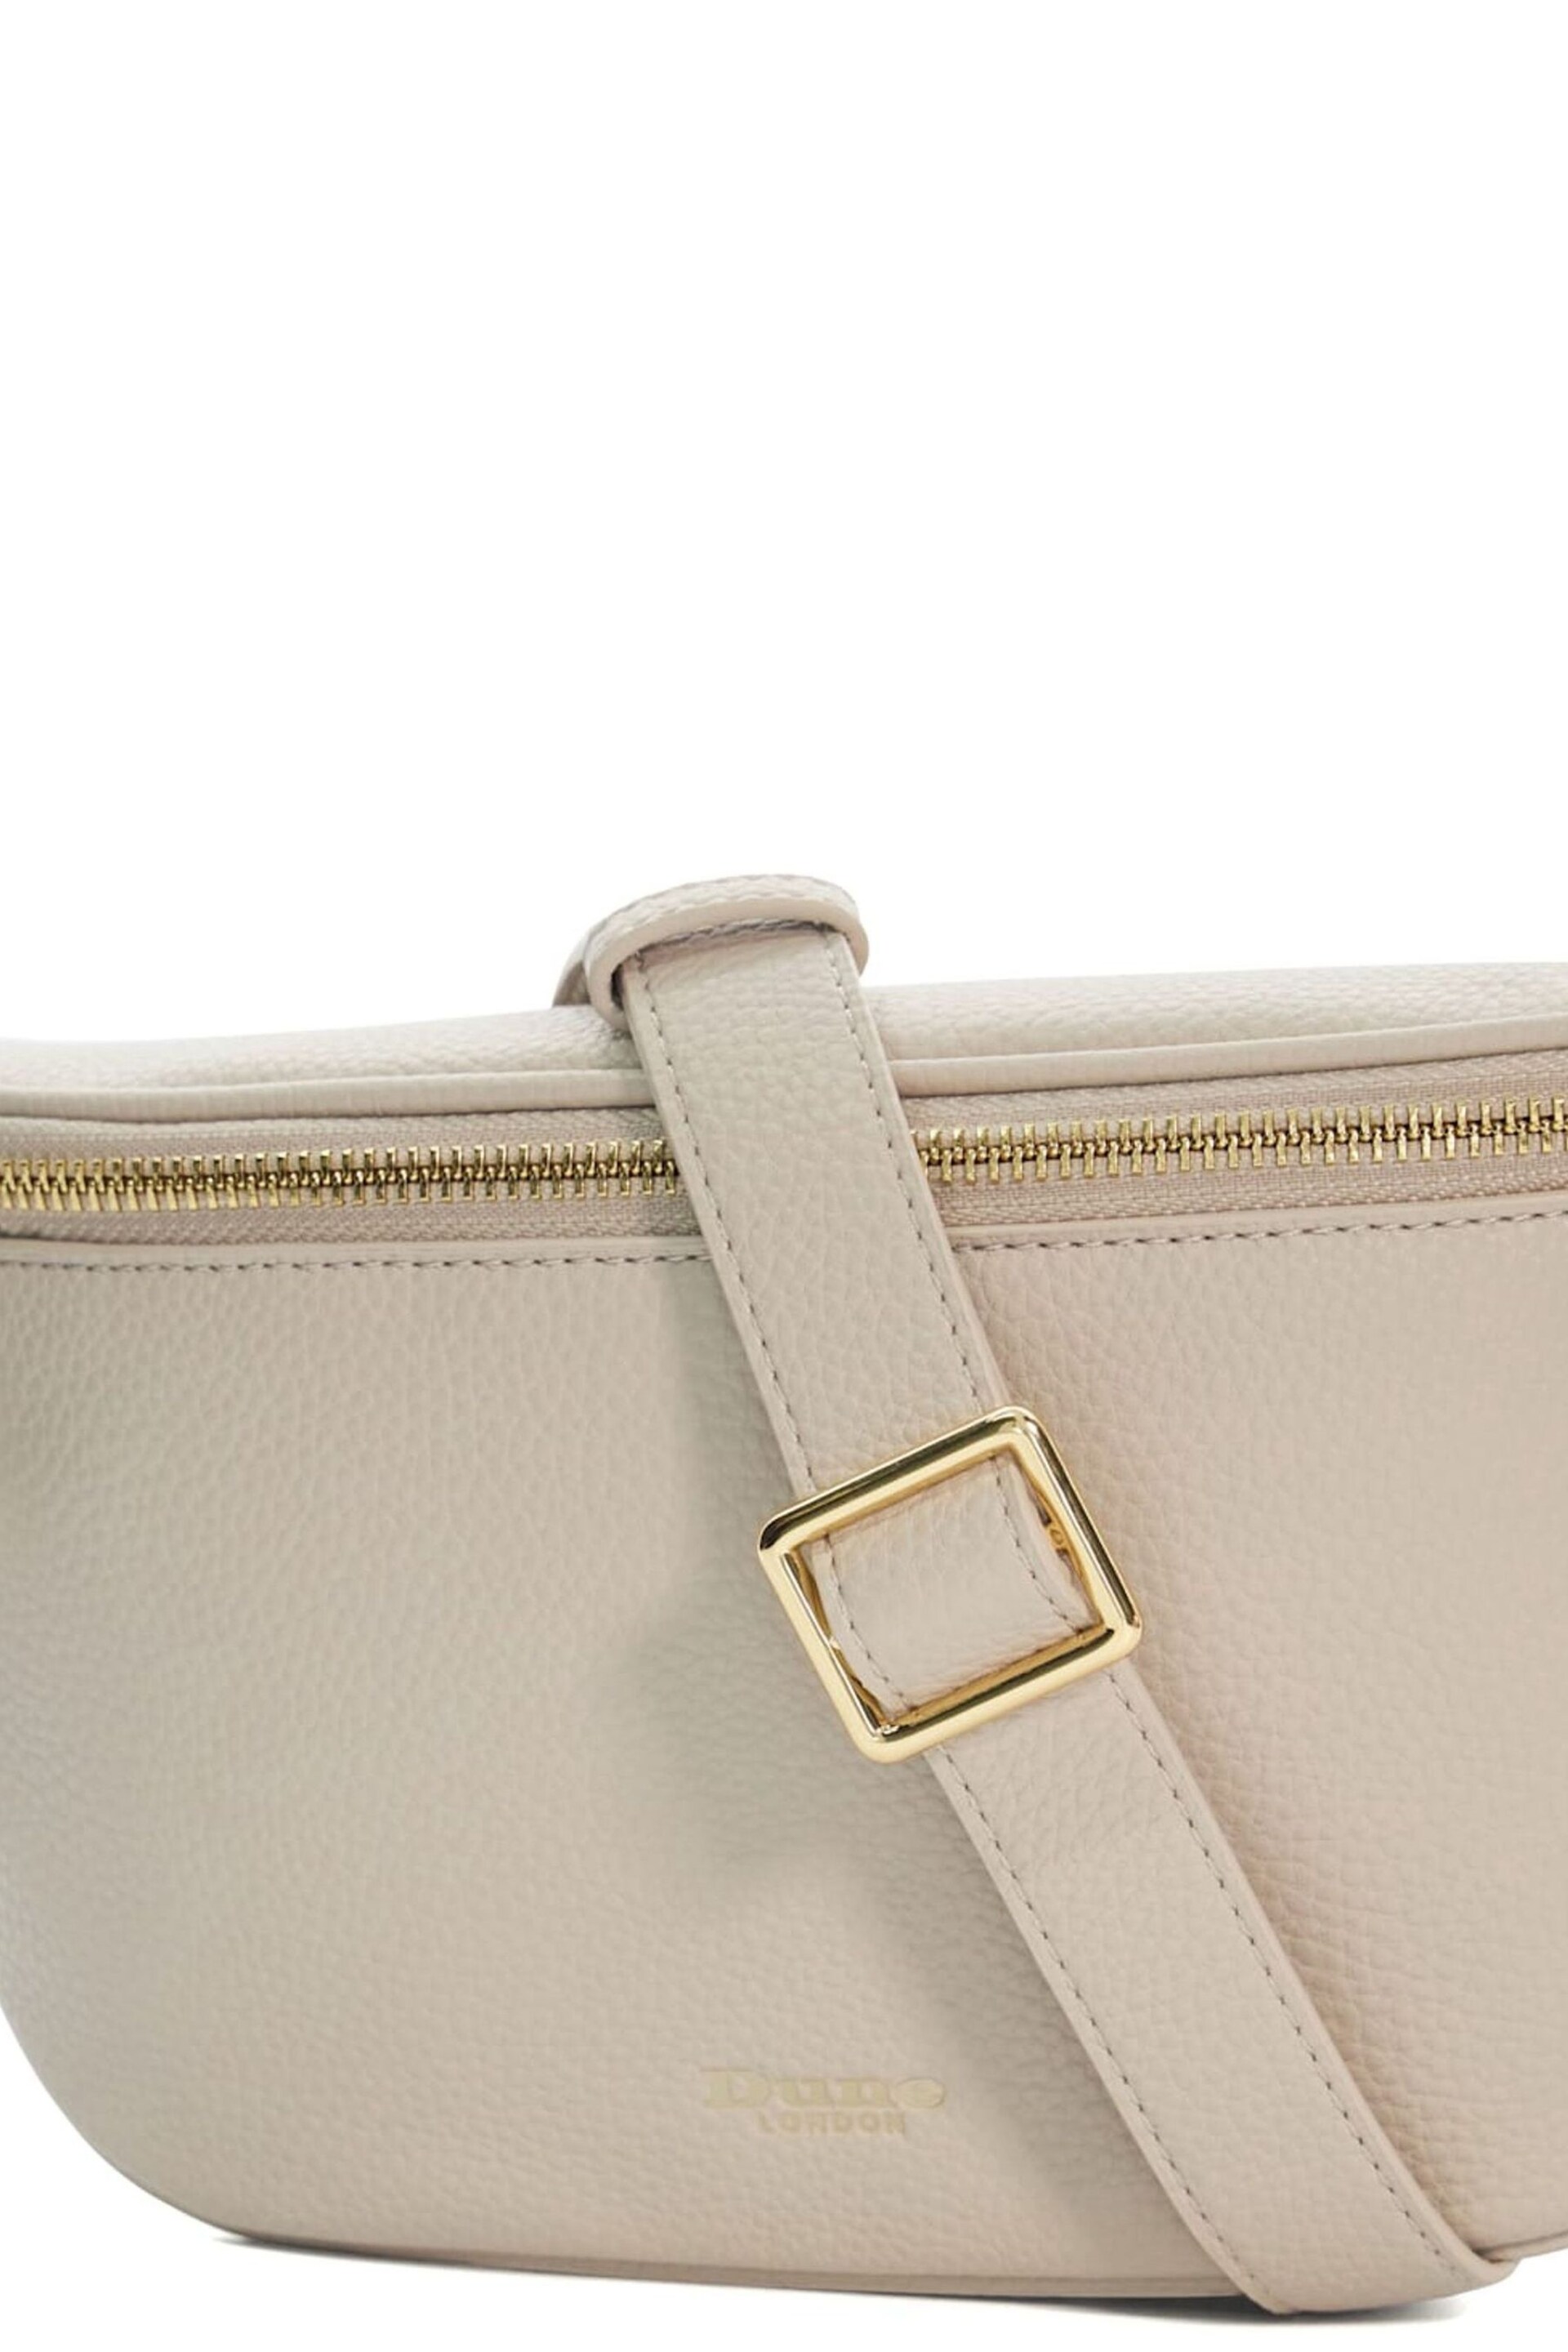 Dune London Cream Small Dent Curved Cross-Body Bag - Image 6 of 6